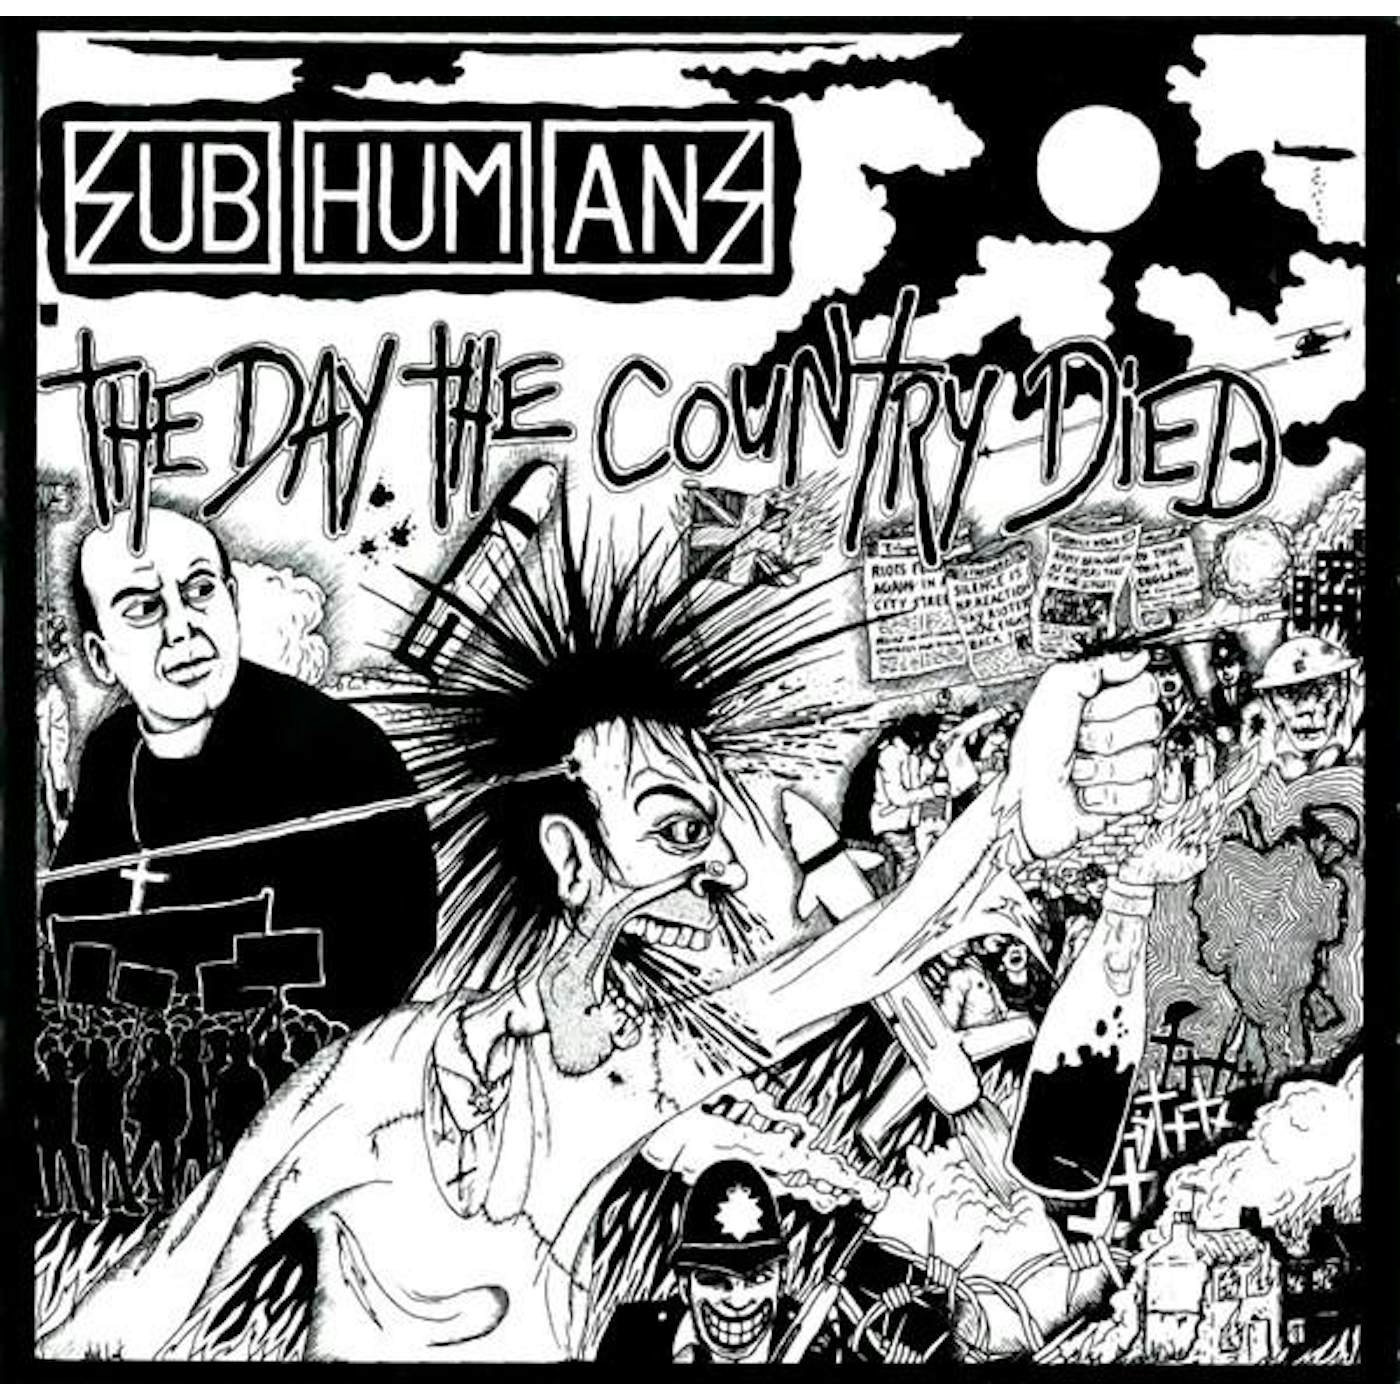 Subhumans DAY THE COUNTRY DIED CD